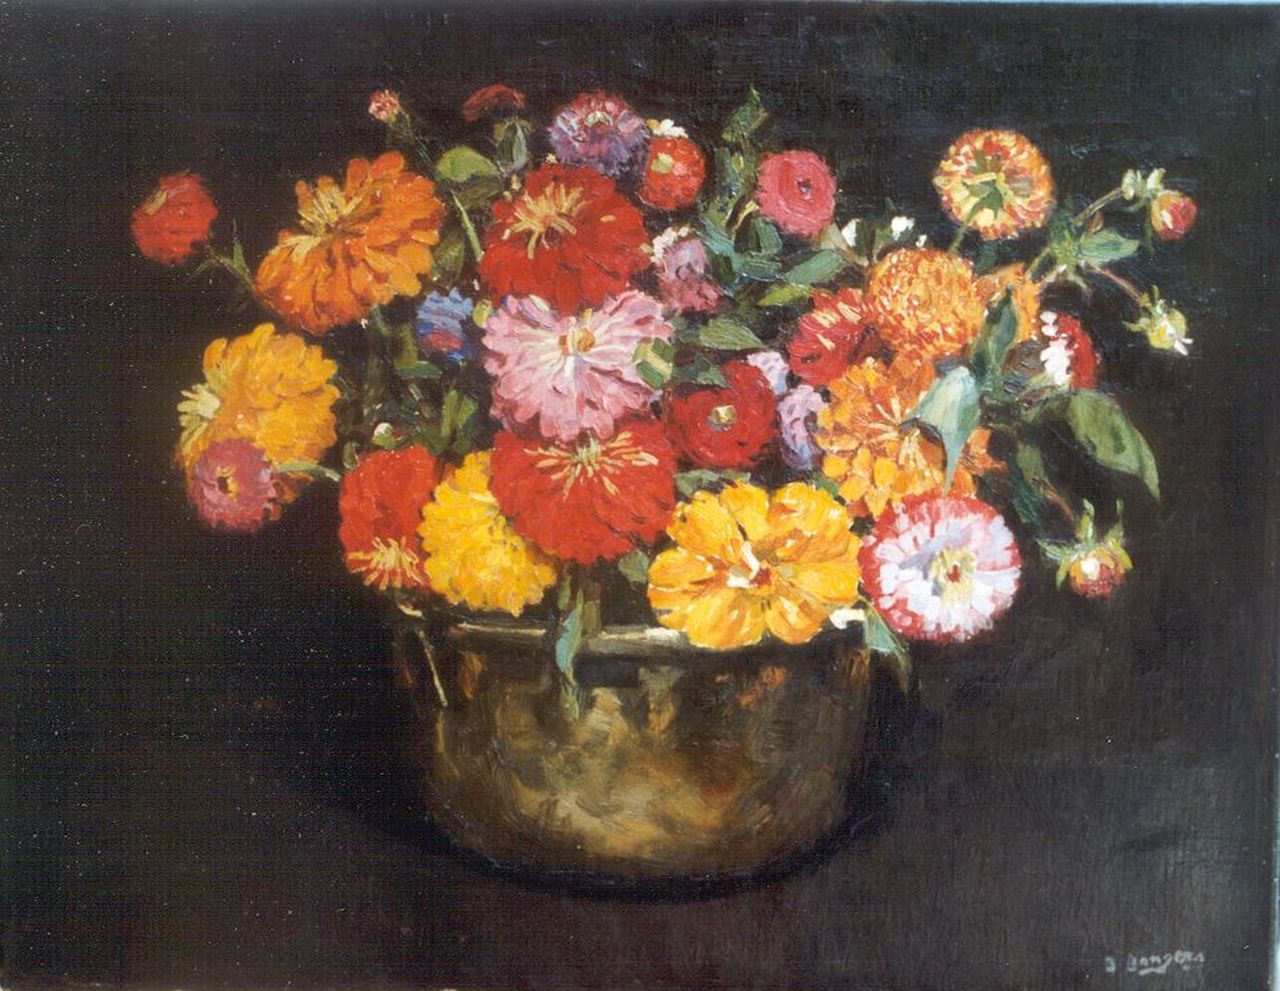 Berend Adrianus Bongers | Zinnias in a copper bowl, oil on canvas, 44.6 x 56.9 cm, signed l.r.